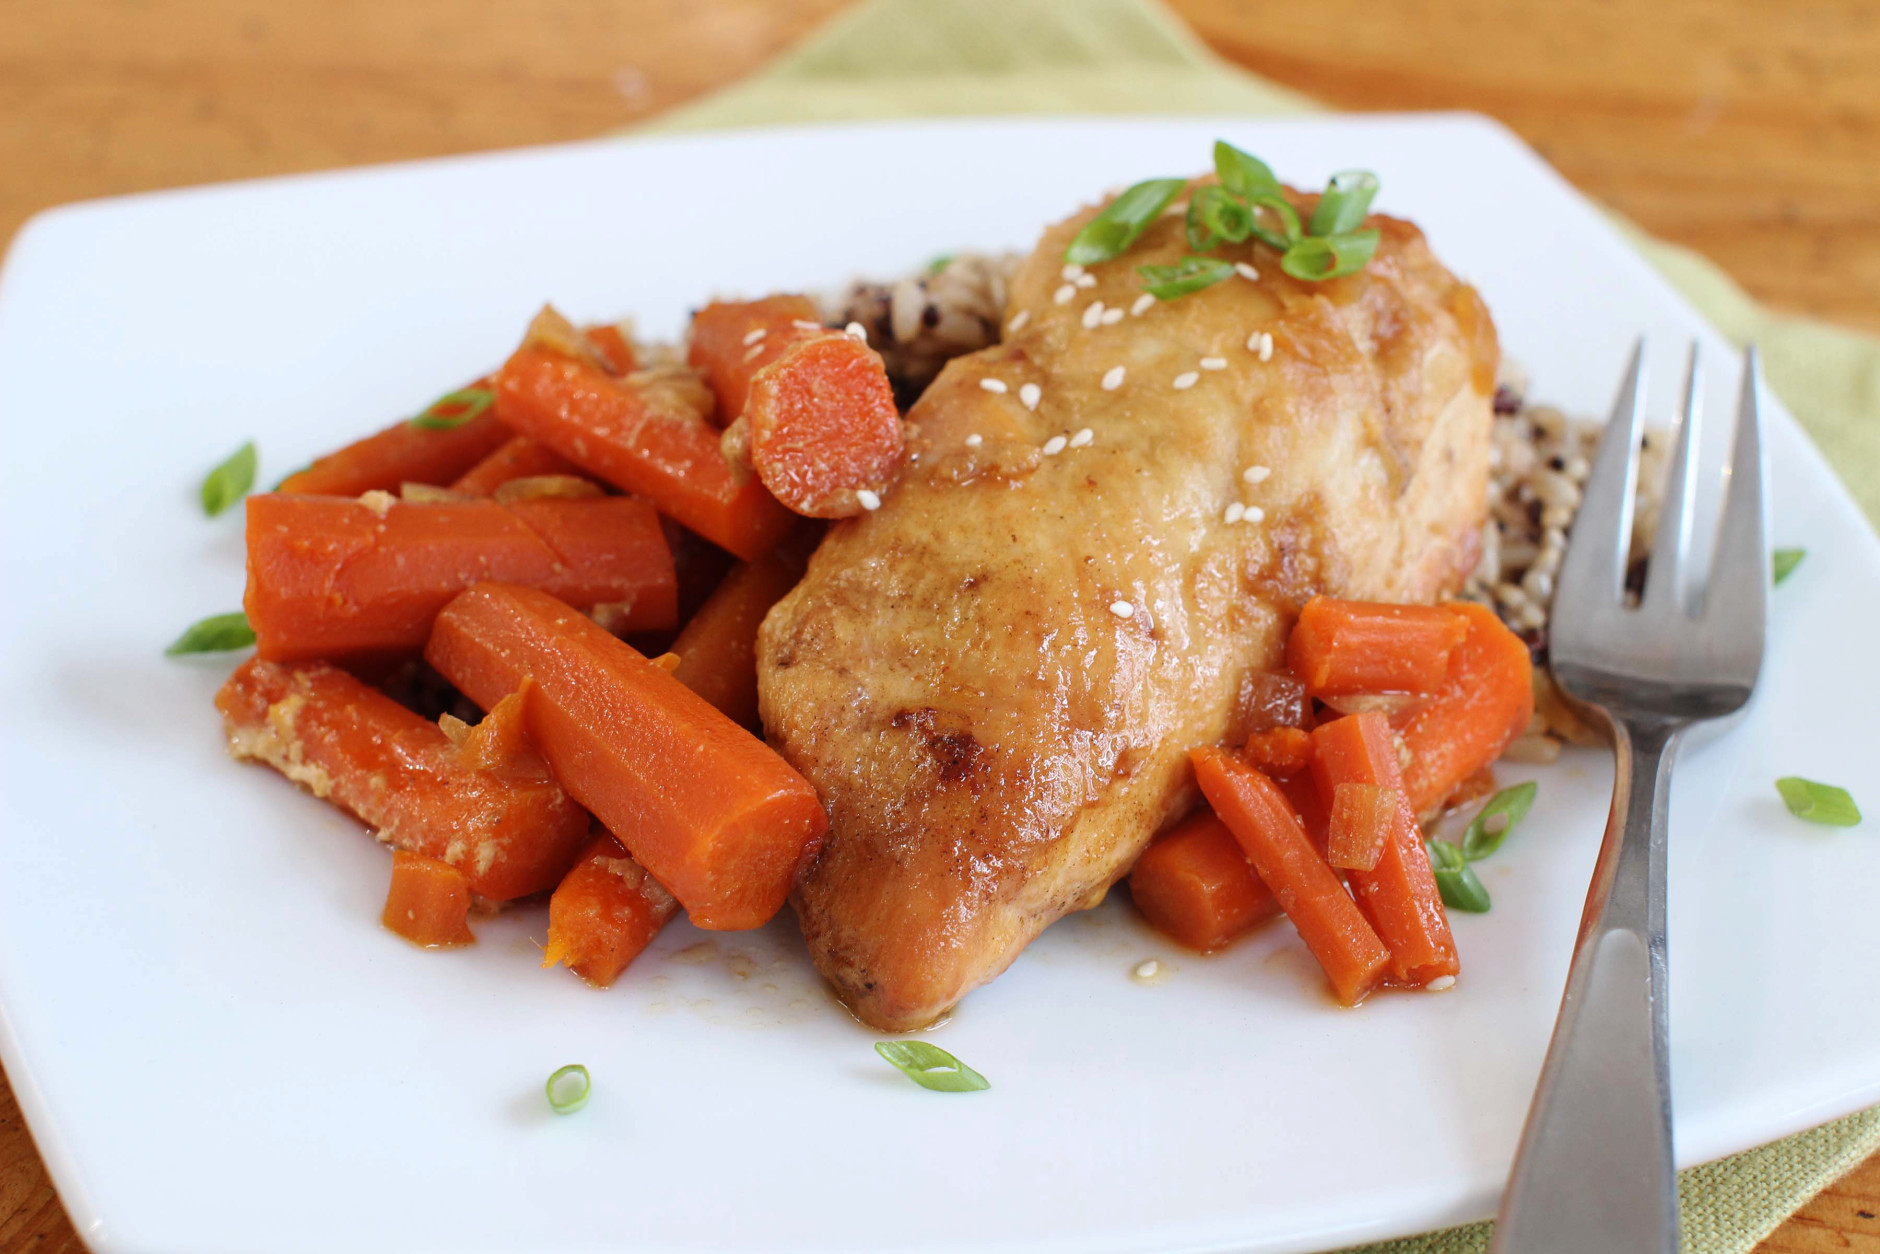 This Feb. 1, 2016 photo shows slow cooker chicken teriyaki with carrots in Concord, N.H. This incredibly versatile and delicious teriyaki sauce recipe can be used on whatever protein at hand: chicken, steak, pork or salmon. (AP Photo/Matthew Mead)